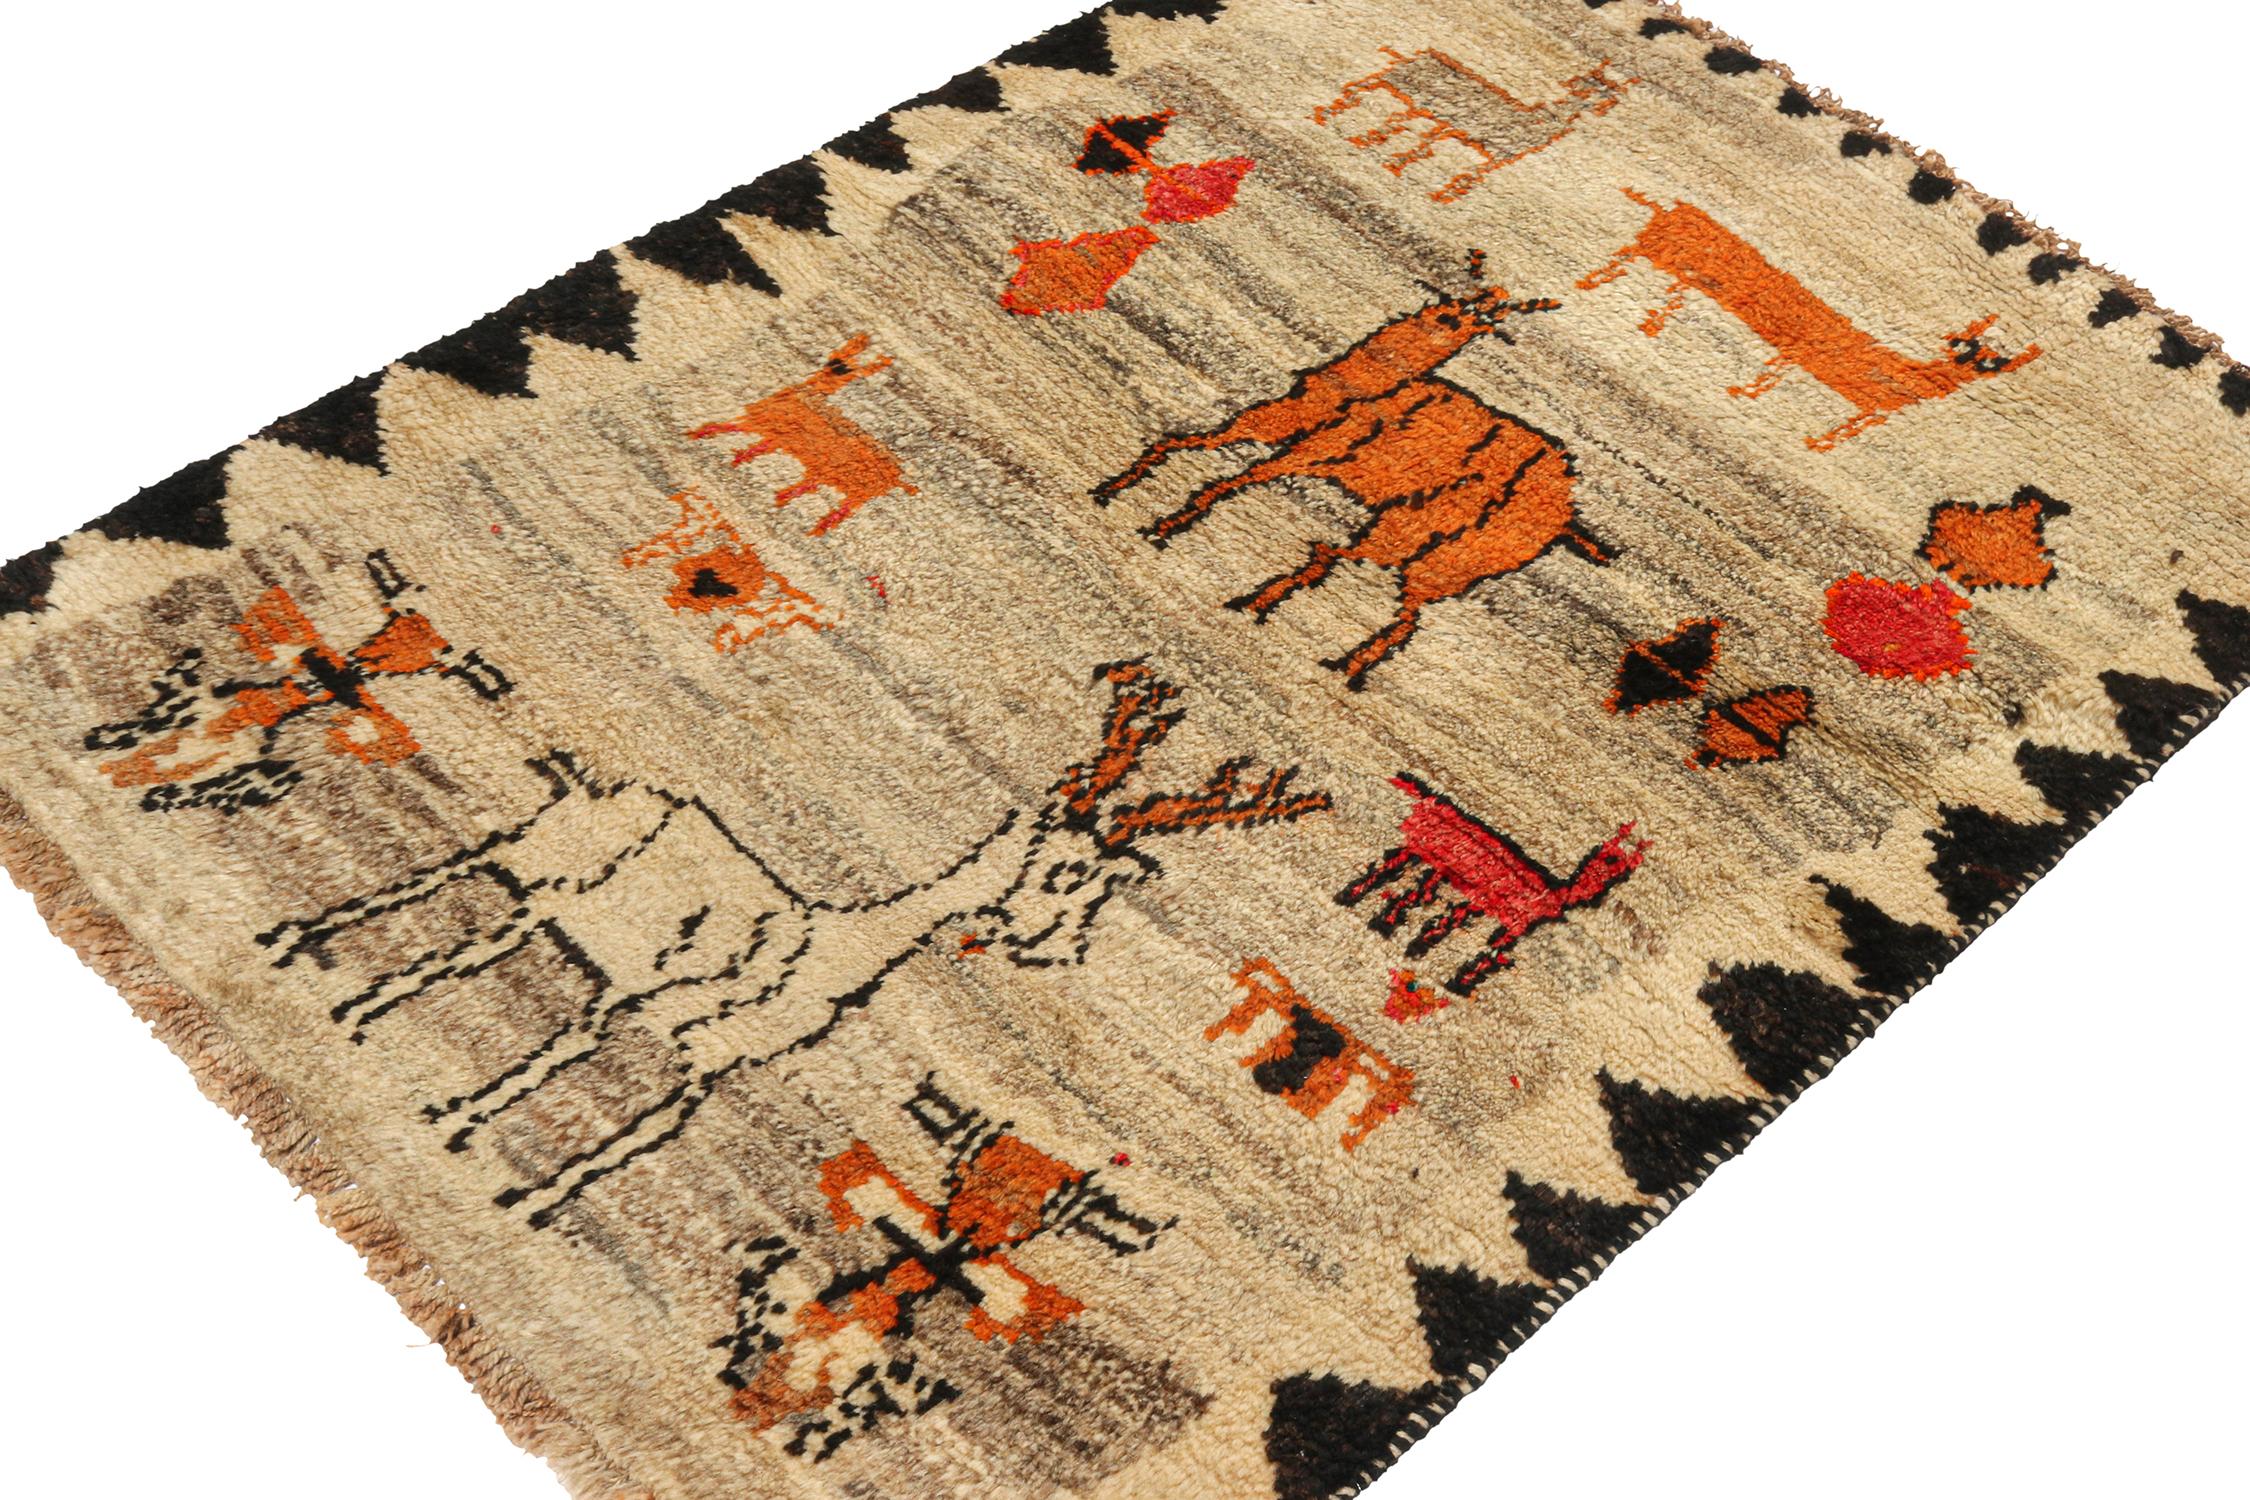 This vintage 3x4 Gabbeh Persian rug is from the latest entries in Rug & Kilim’s rare tribal curations. Hand-knotted in wool circa 1950-1960.

On the Design:

This tribal provenance is one of the most primitive, and collectible shabby-chic styles